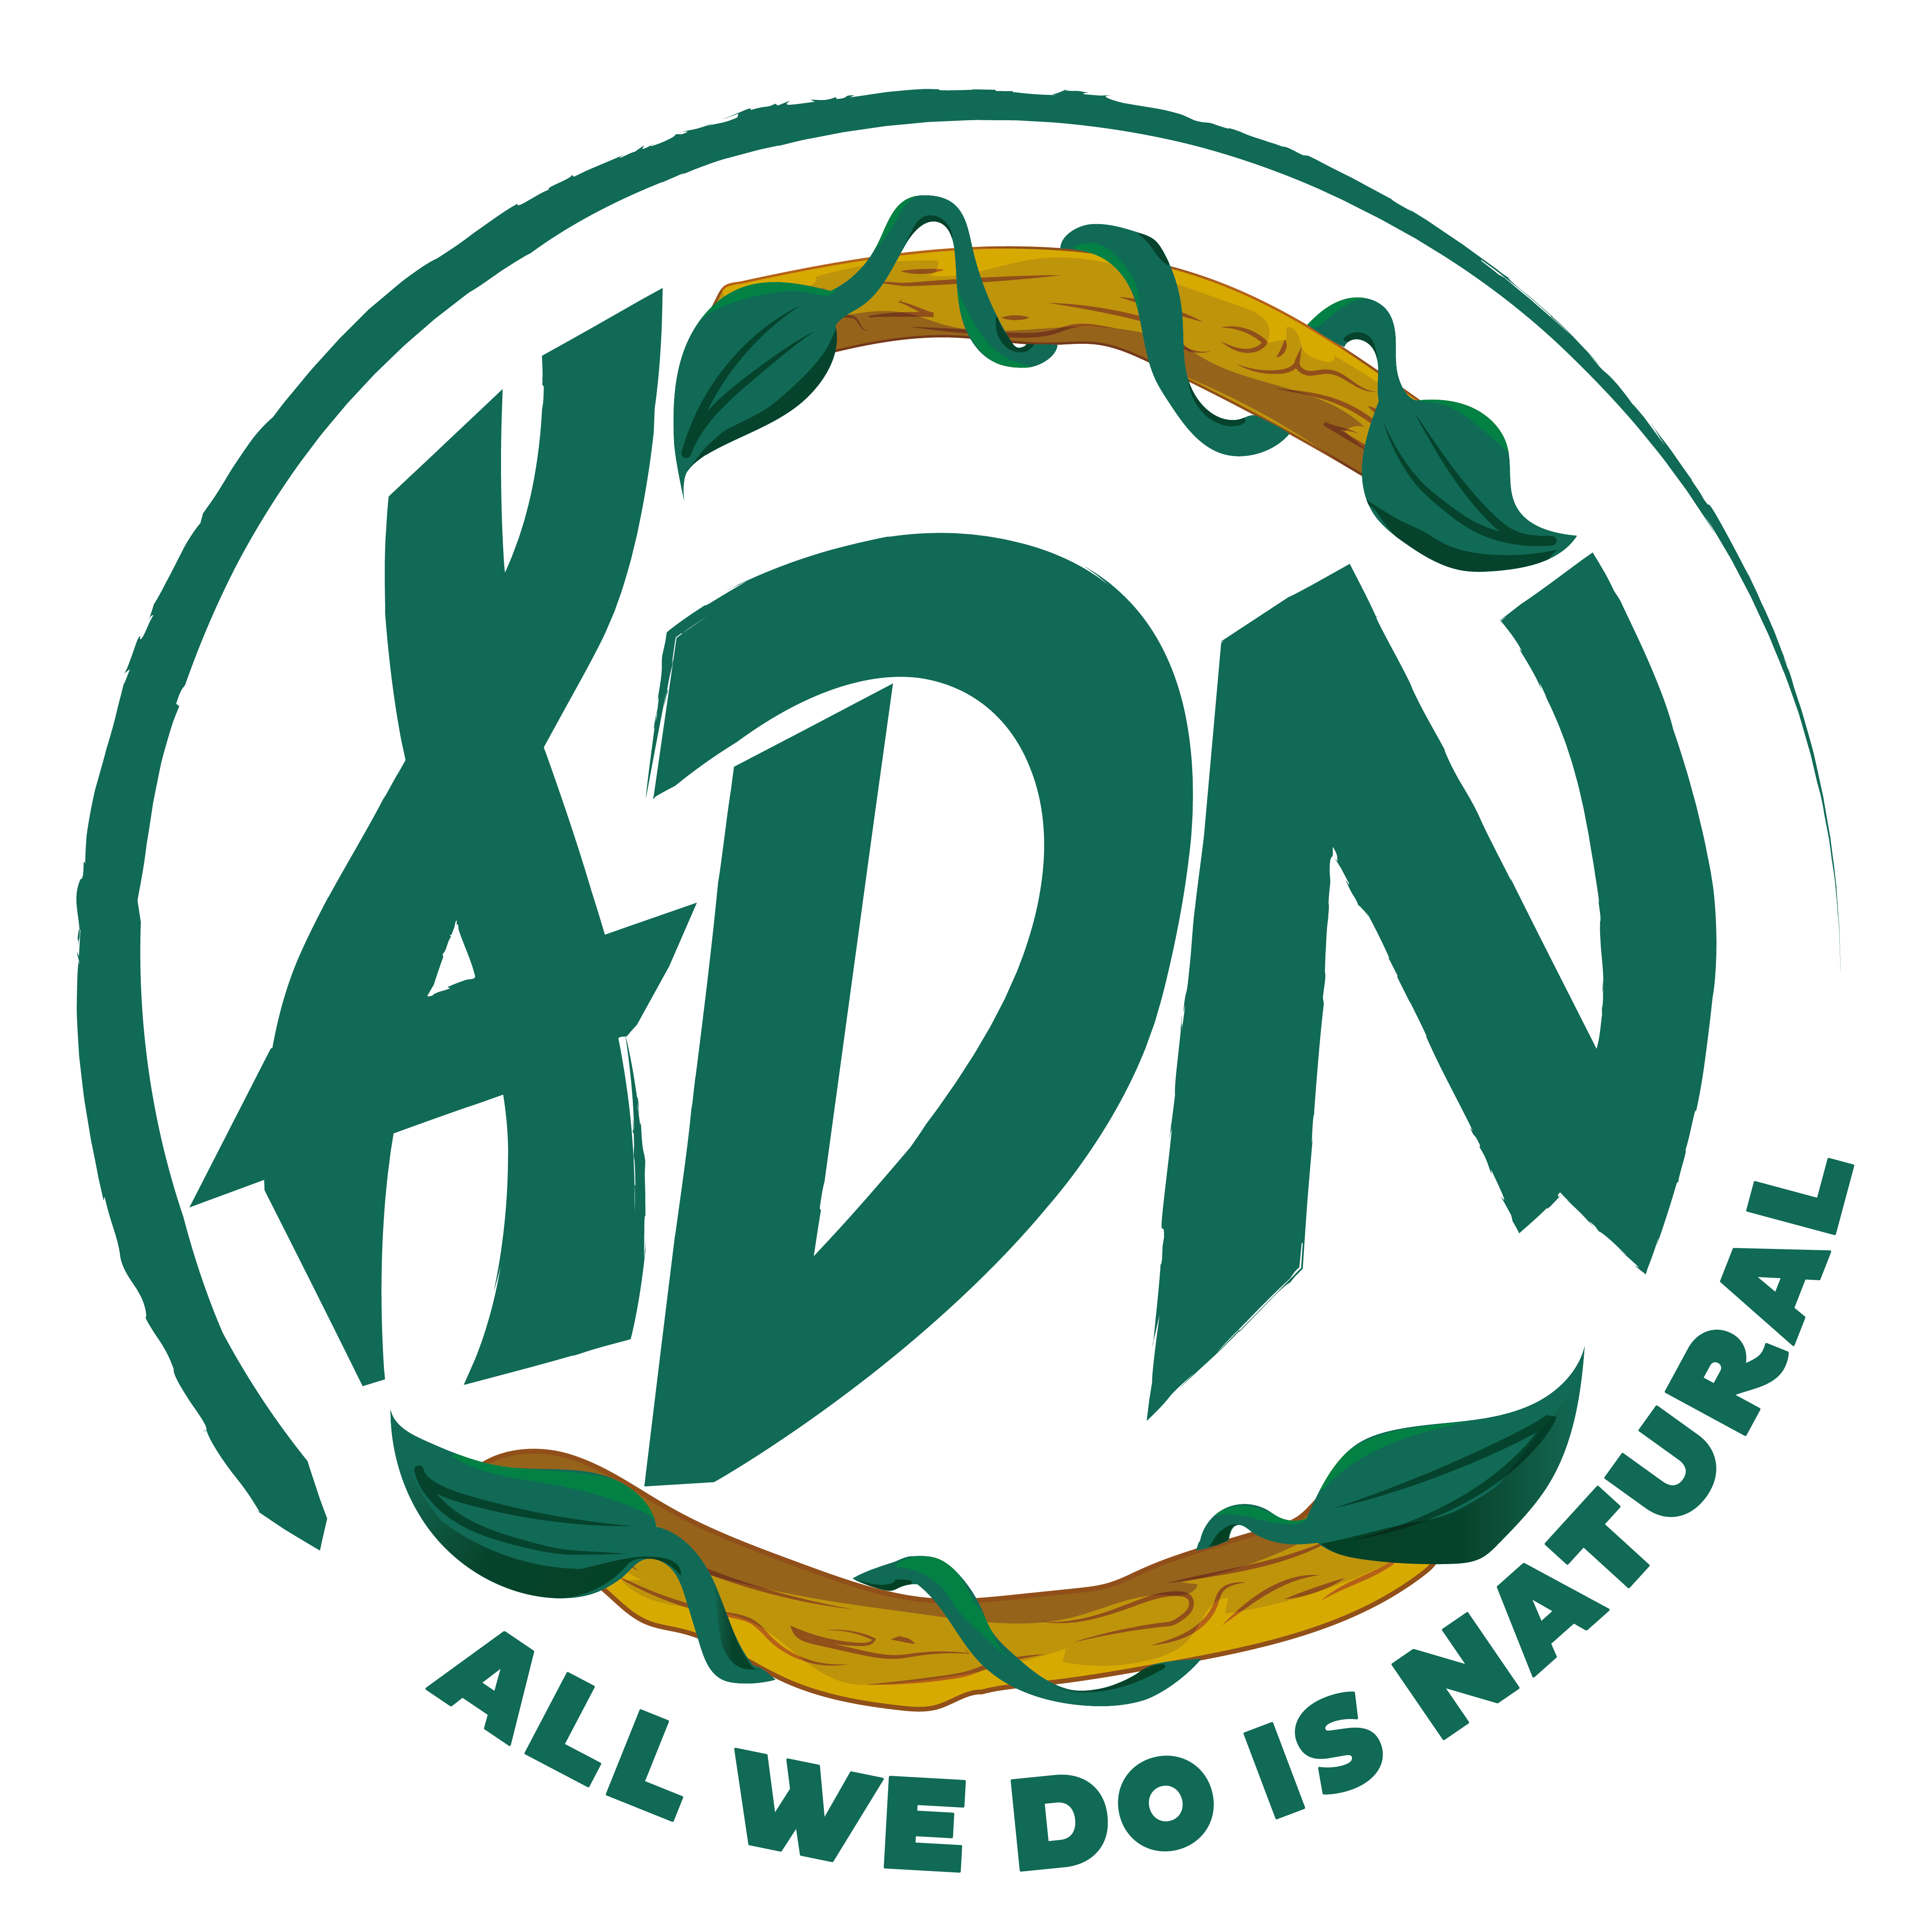 Logo ADN - ALL WE DO IS NATURAL